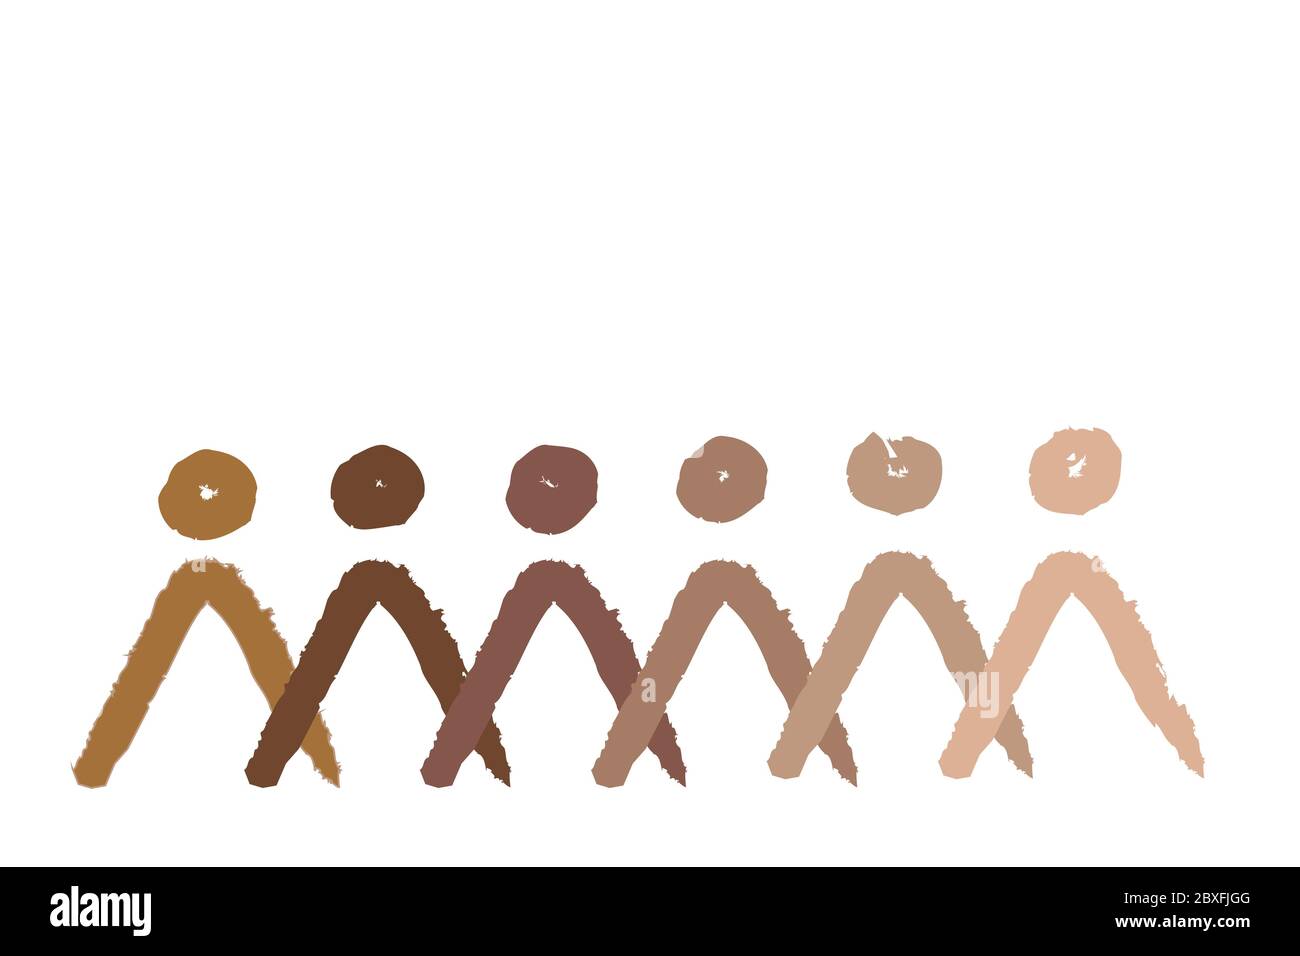 Different races people protest, interracial community unity. Modern vector in simple naive style. Abstract human shapes different nationalities on whi Stock Vector